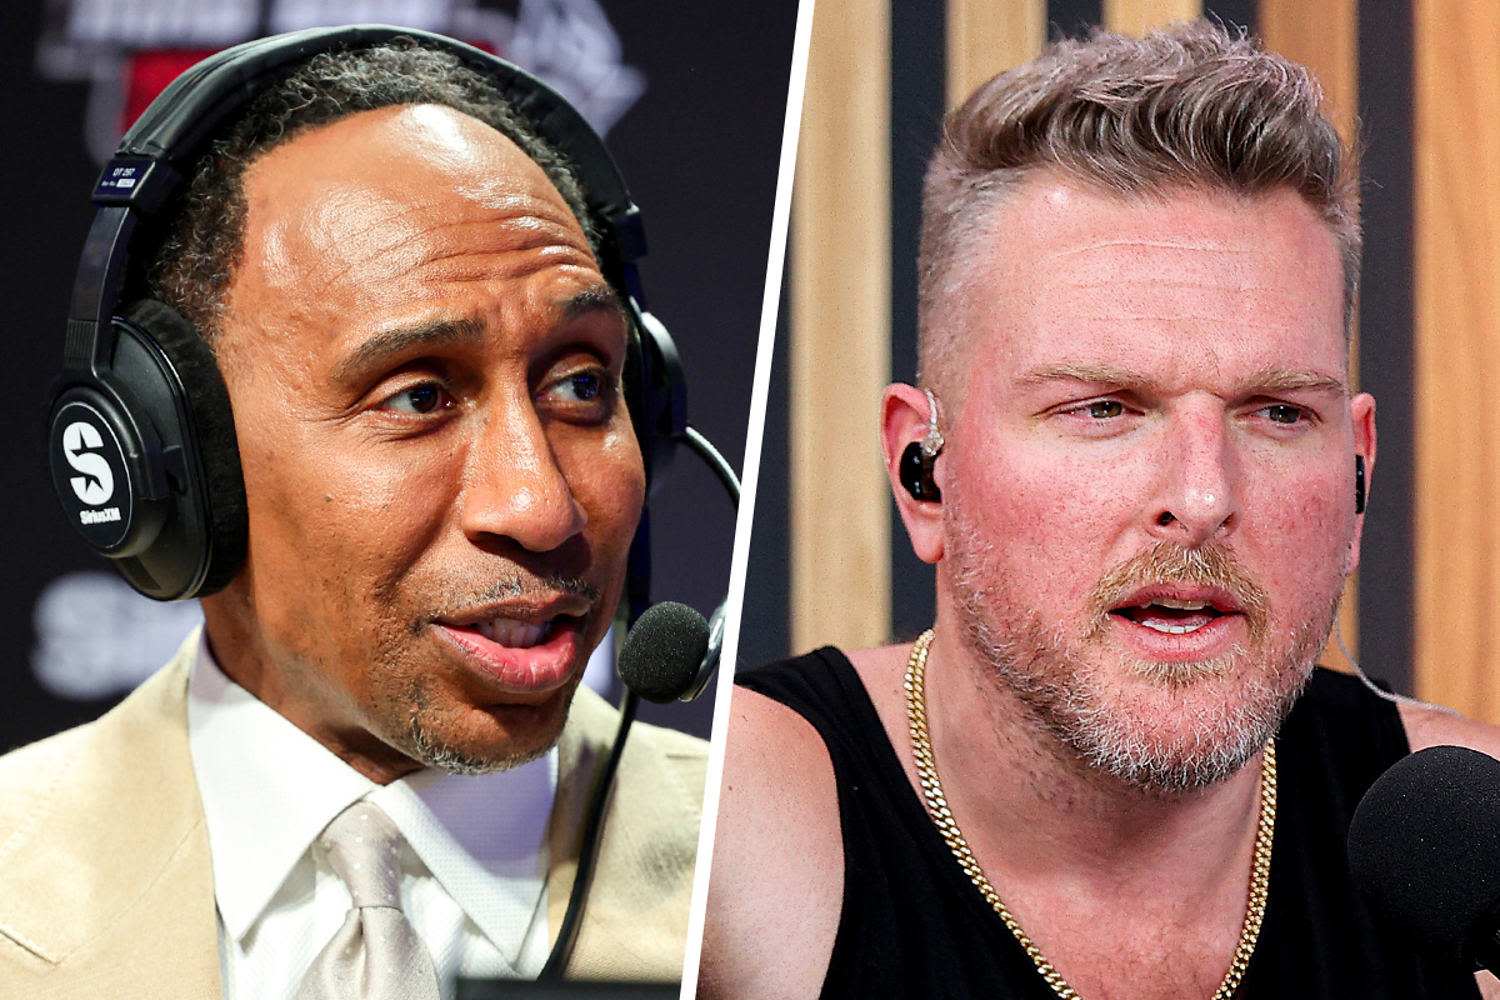 ESPN blowhards Stephen A. Smith and Pat McAfee embrace misogyny on air